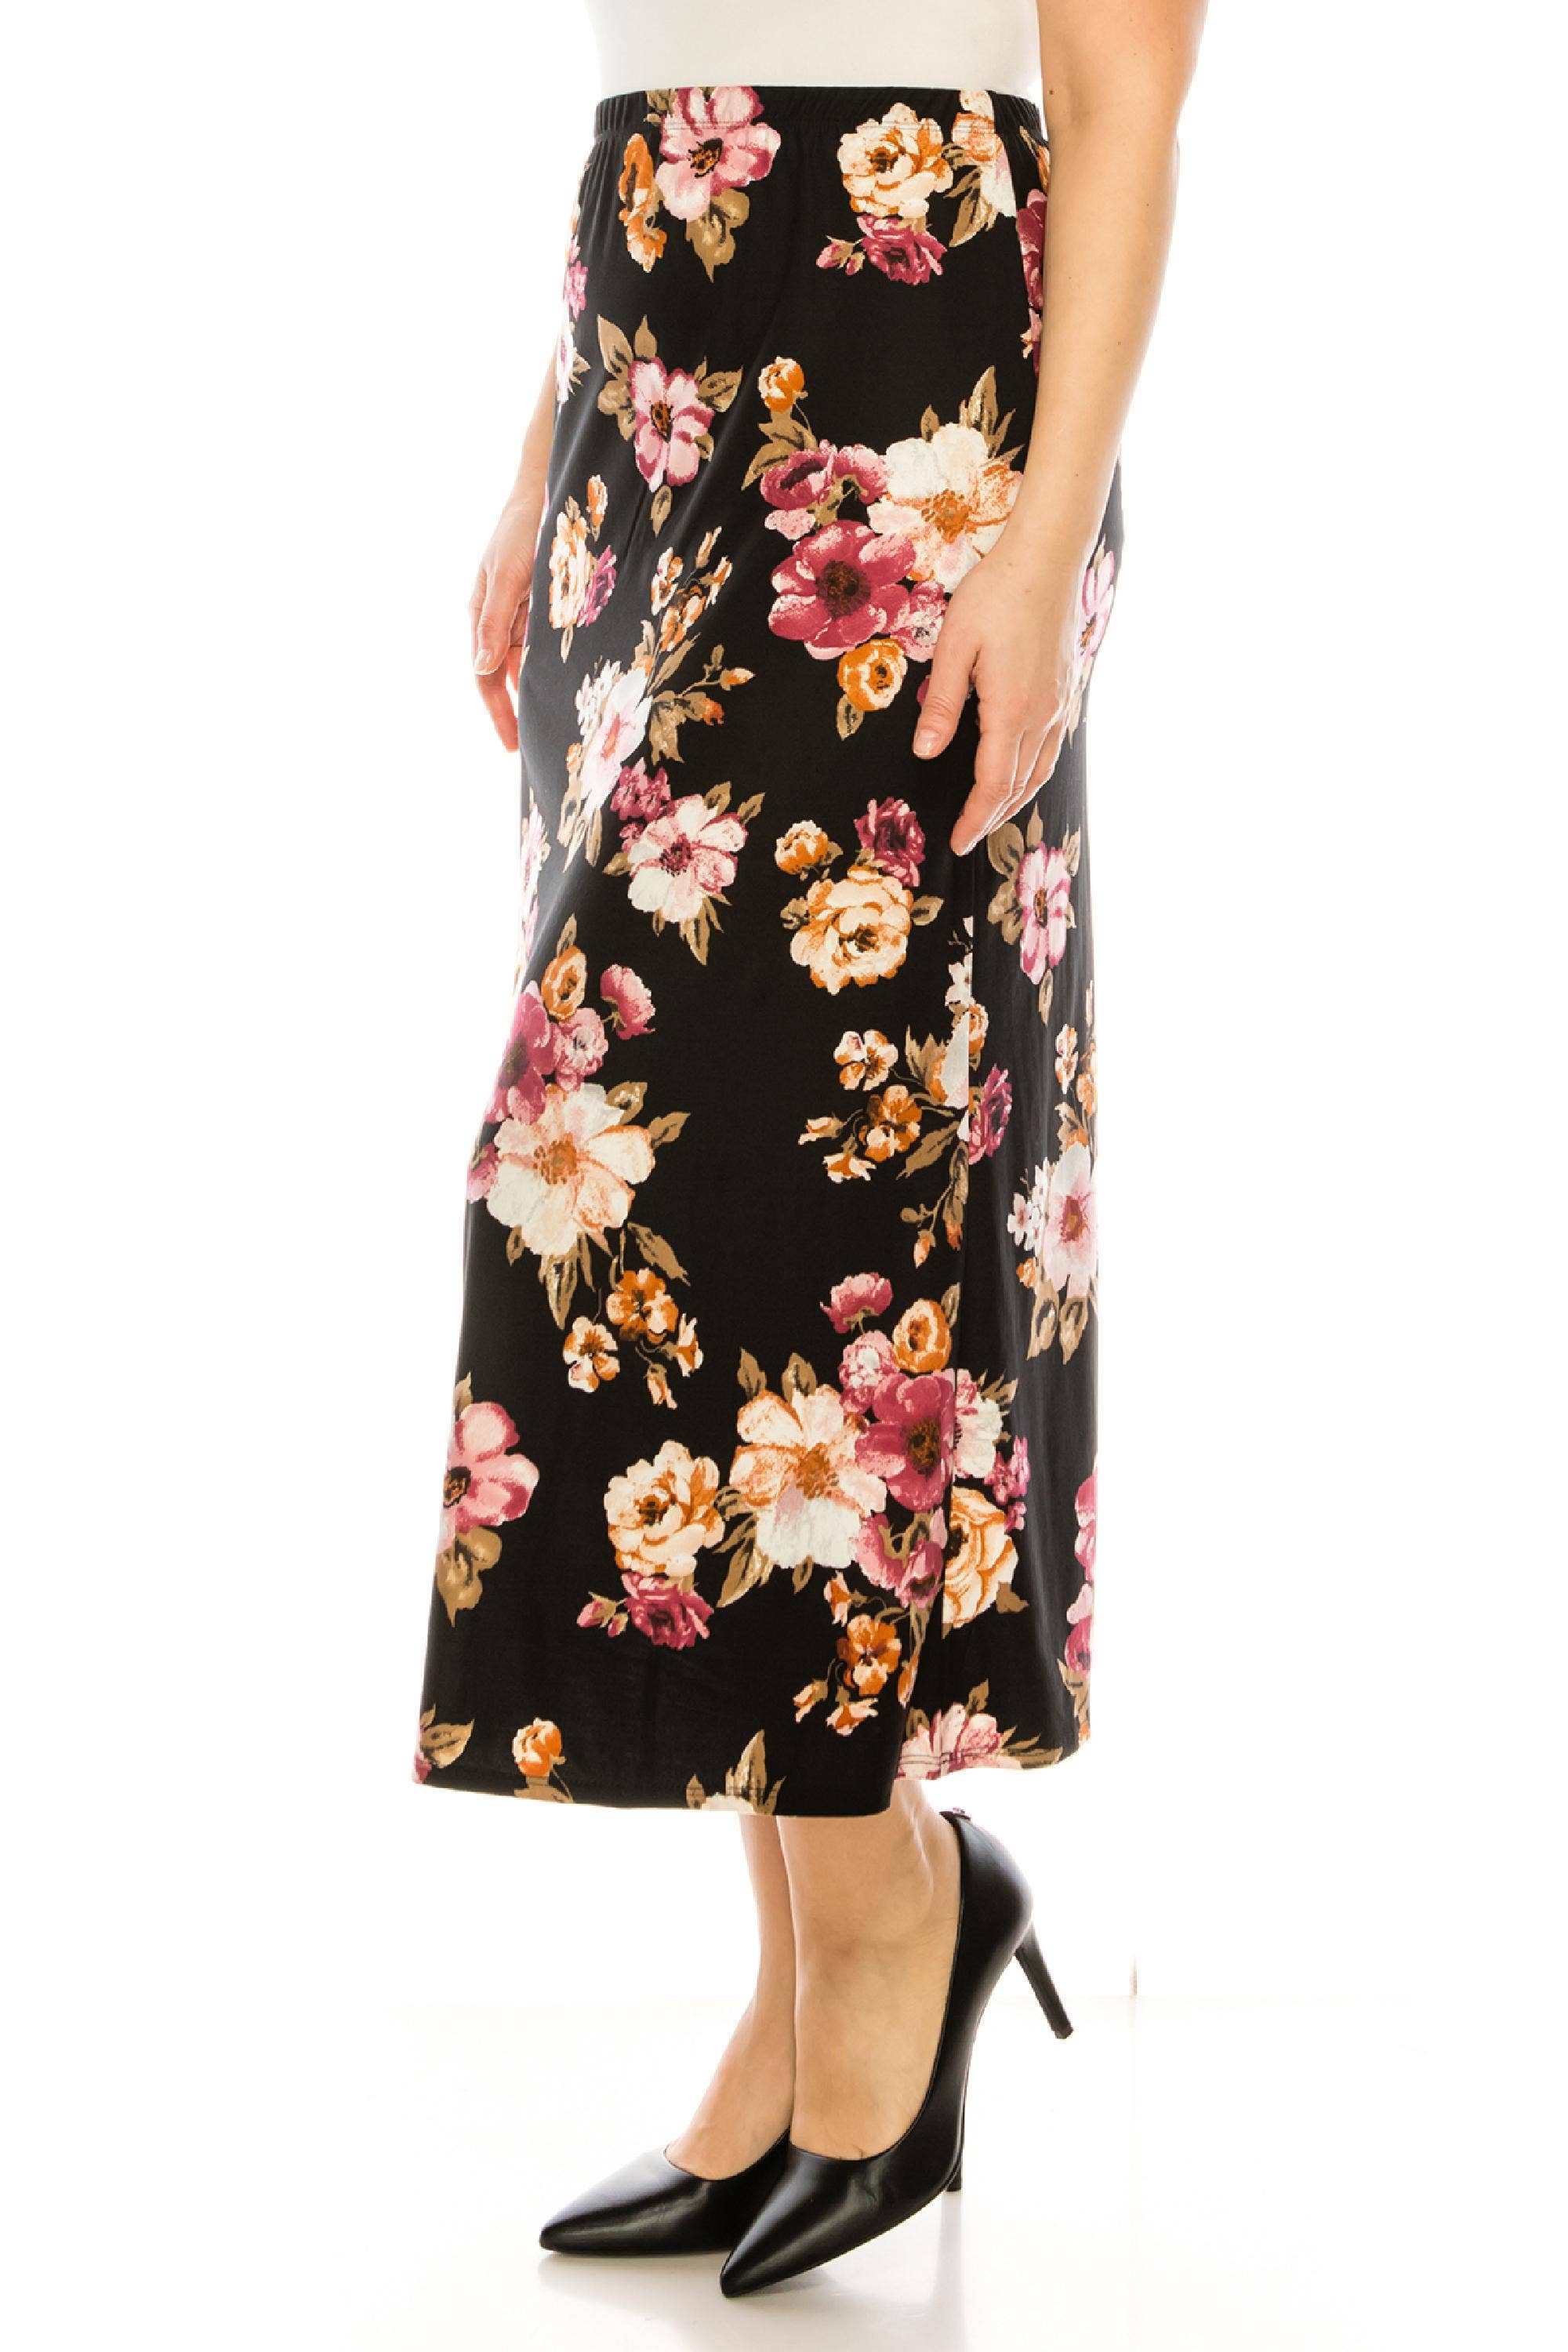 Wholesale Women's Floral Flared Plus Size Midi Skirts for your store - Faire